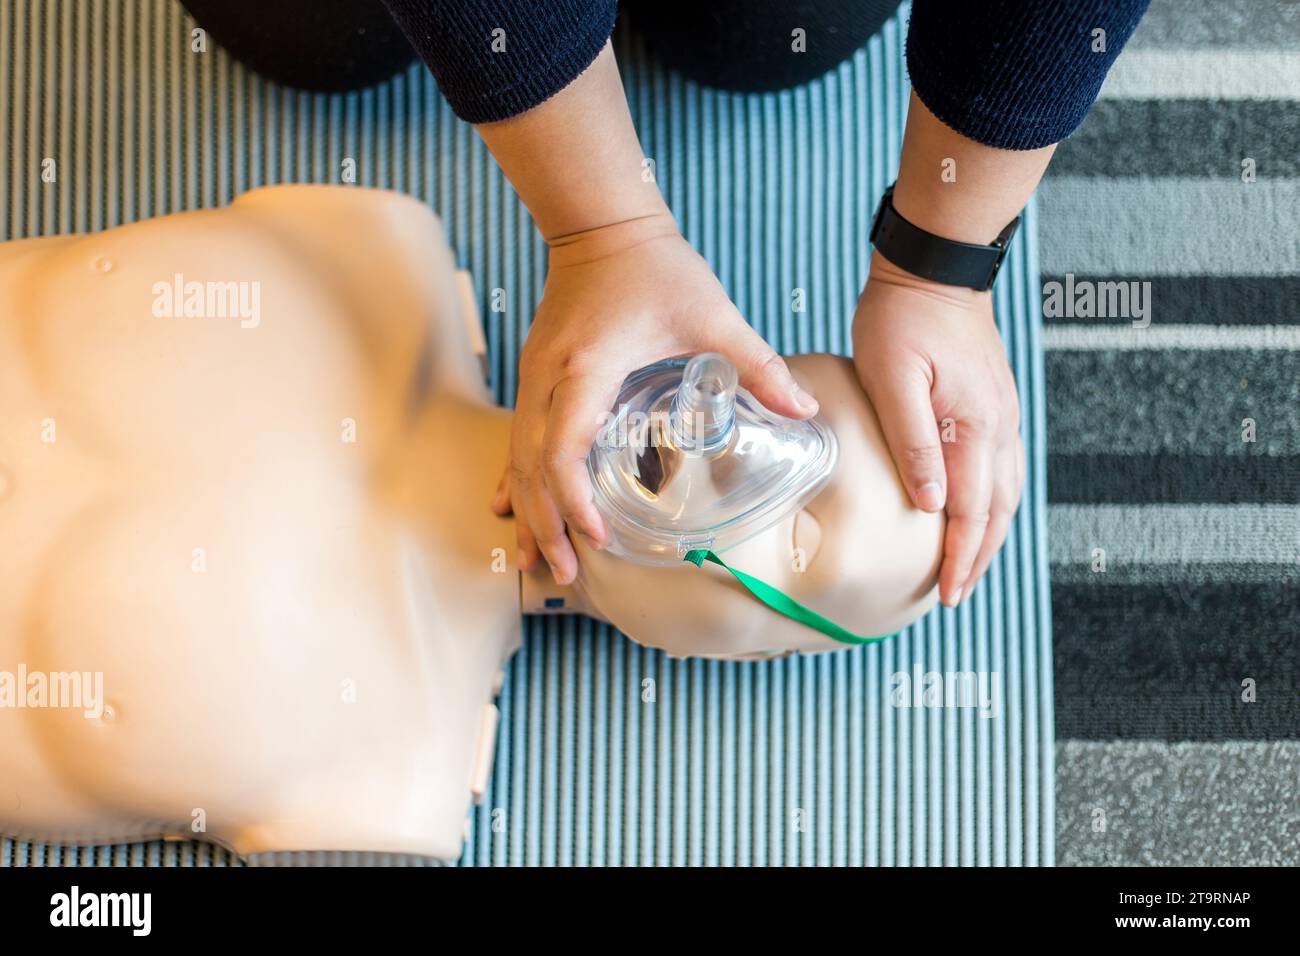 Woman performing CPR training dummy Stock Photo